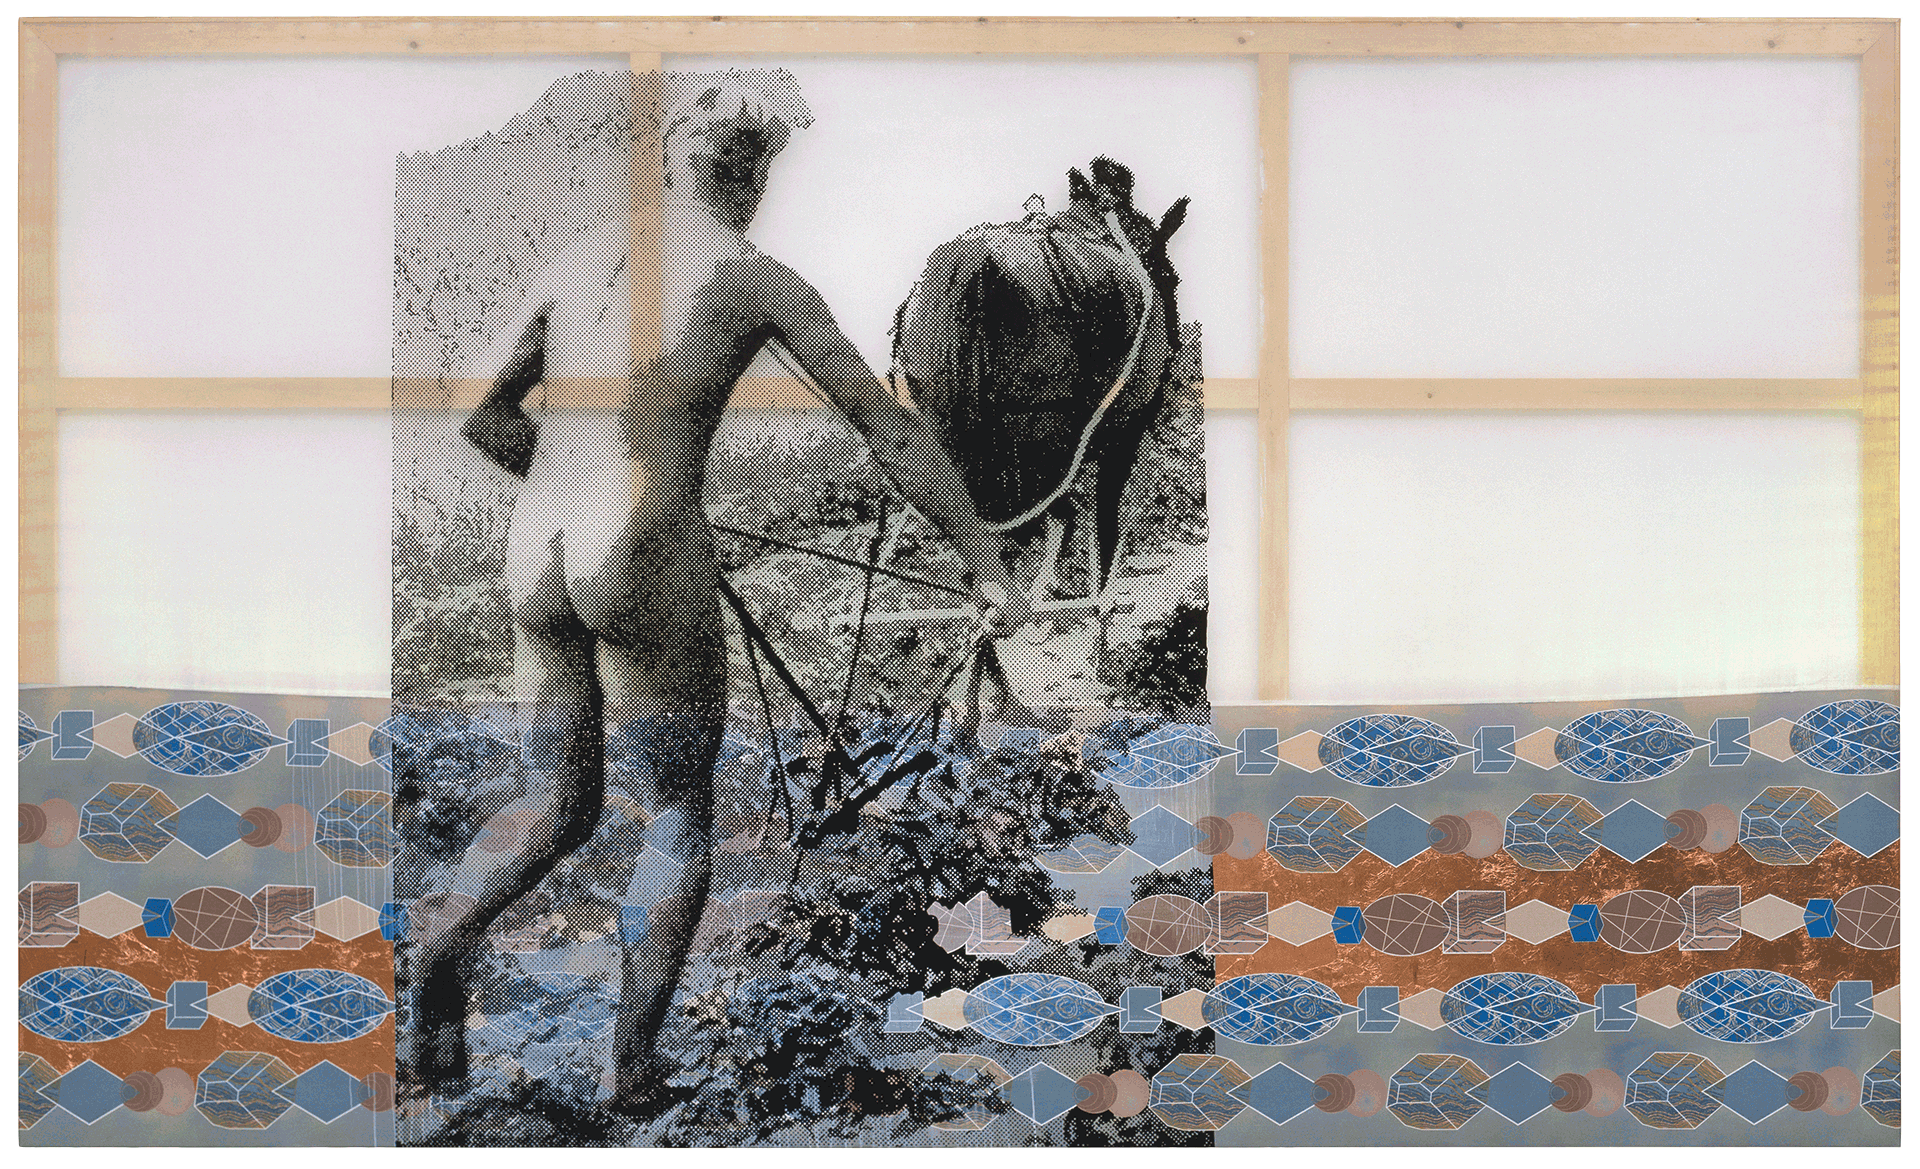 A painting by Sigmar Polke titled Primavera, dated 2003.